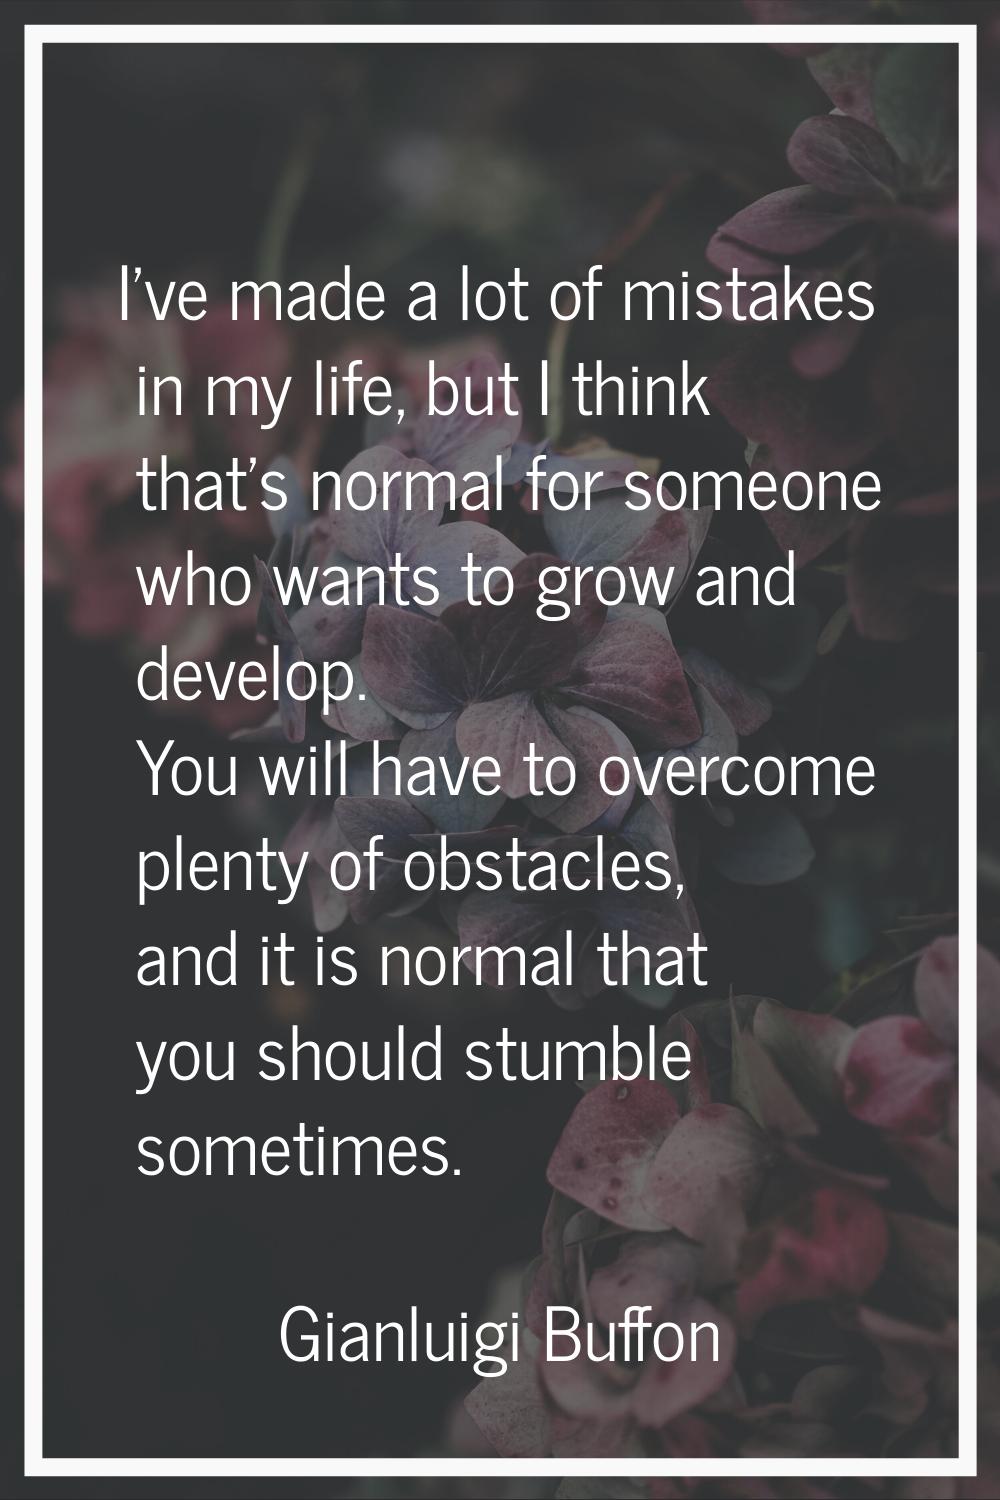 I've made a lot of mistakes in my life, but I think that's normal for someone who wants to grow and